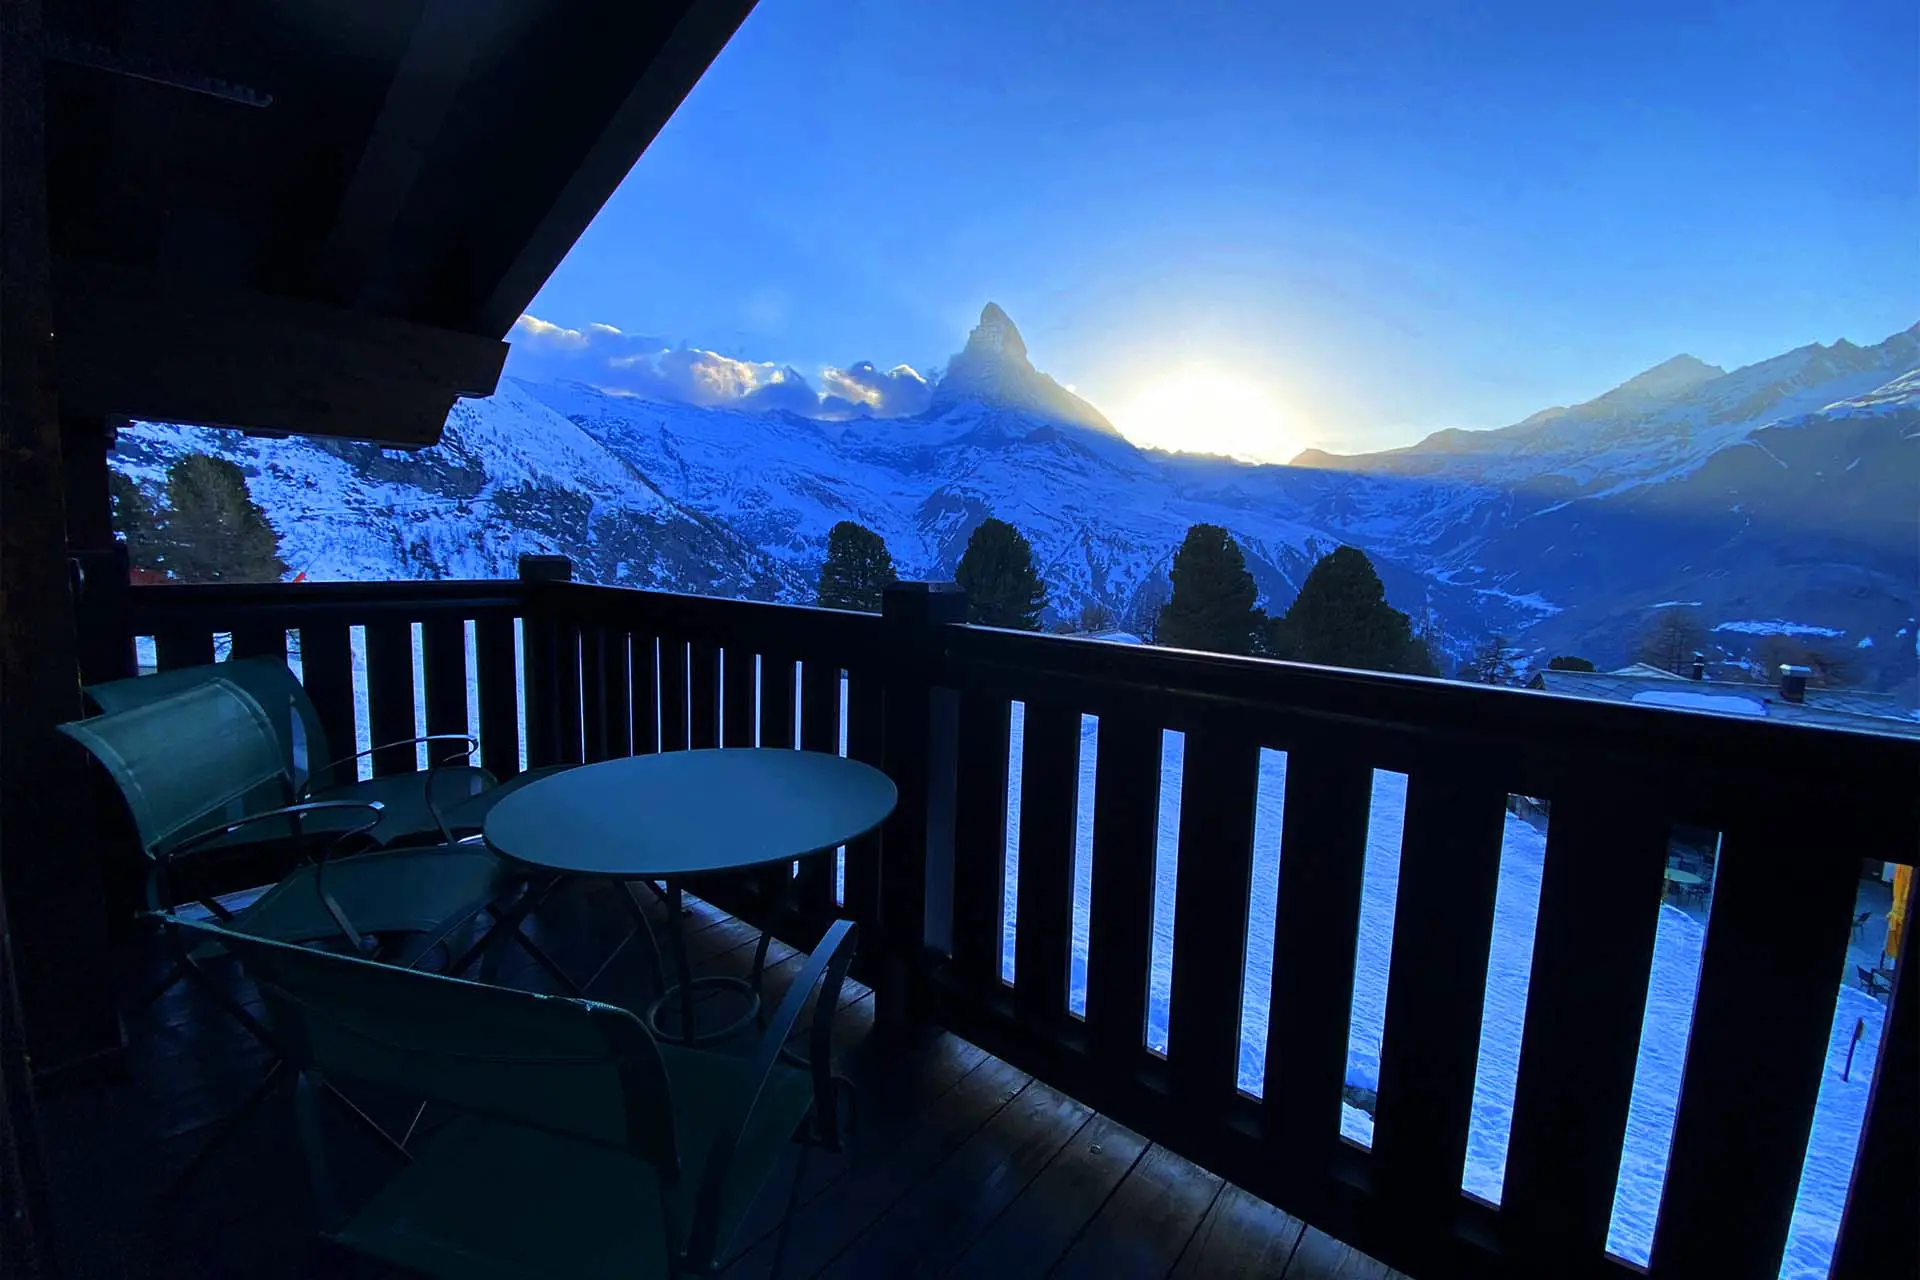 The 5 Star Hotel Riffelalp with the unforgettable view on the Matterhorn.